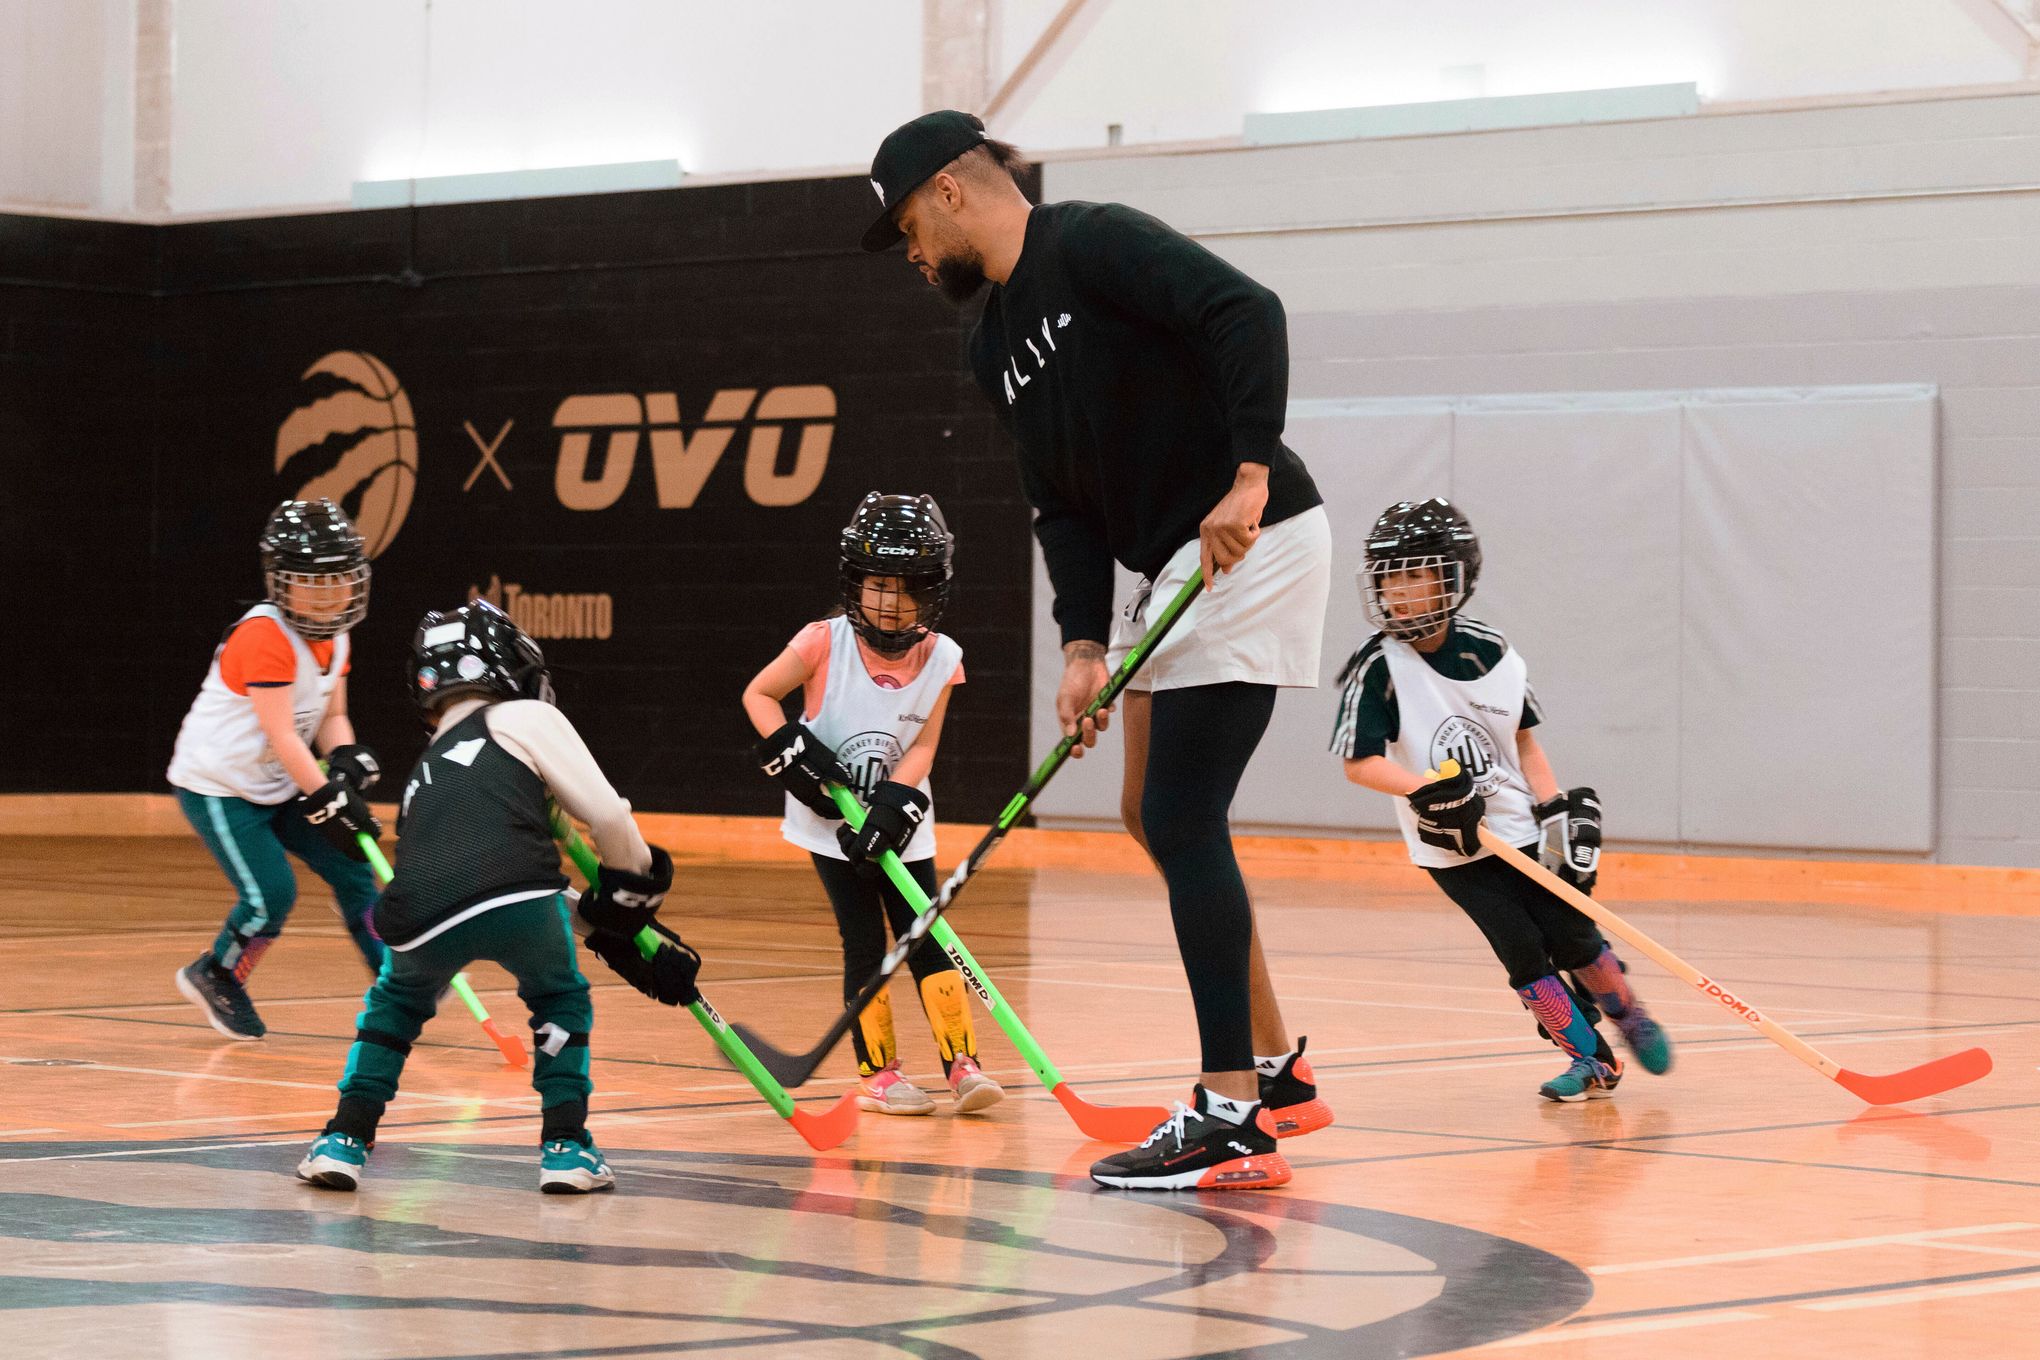 LA Kings looking to diversify game with ball hockey program